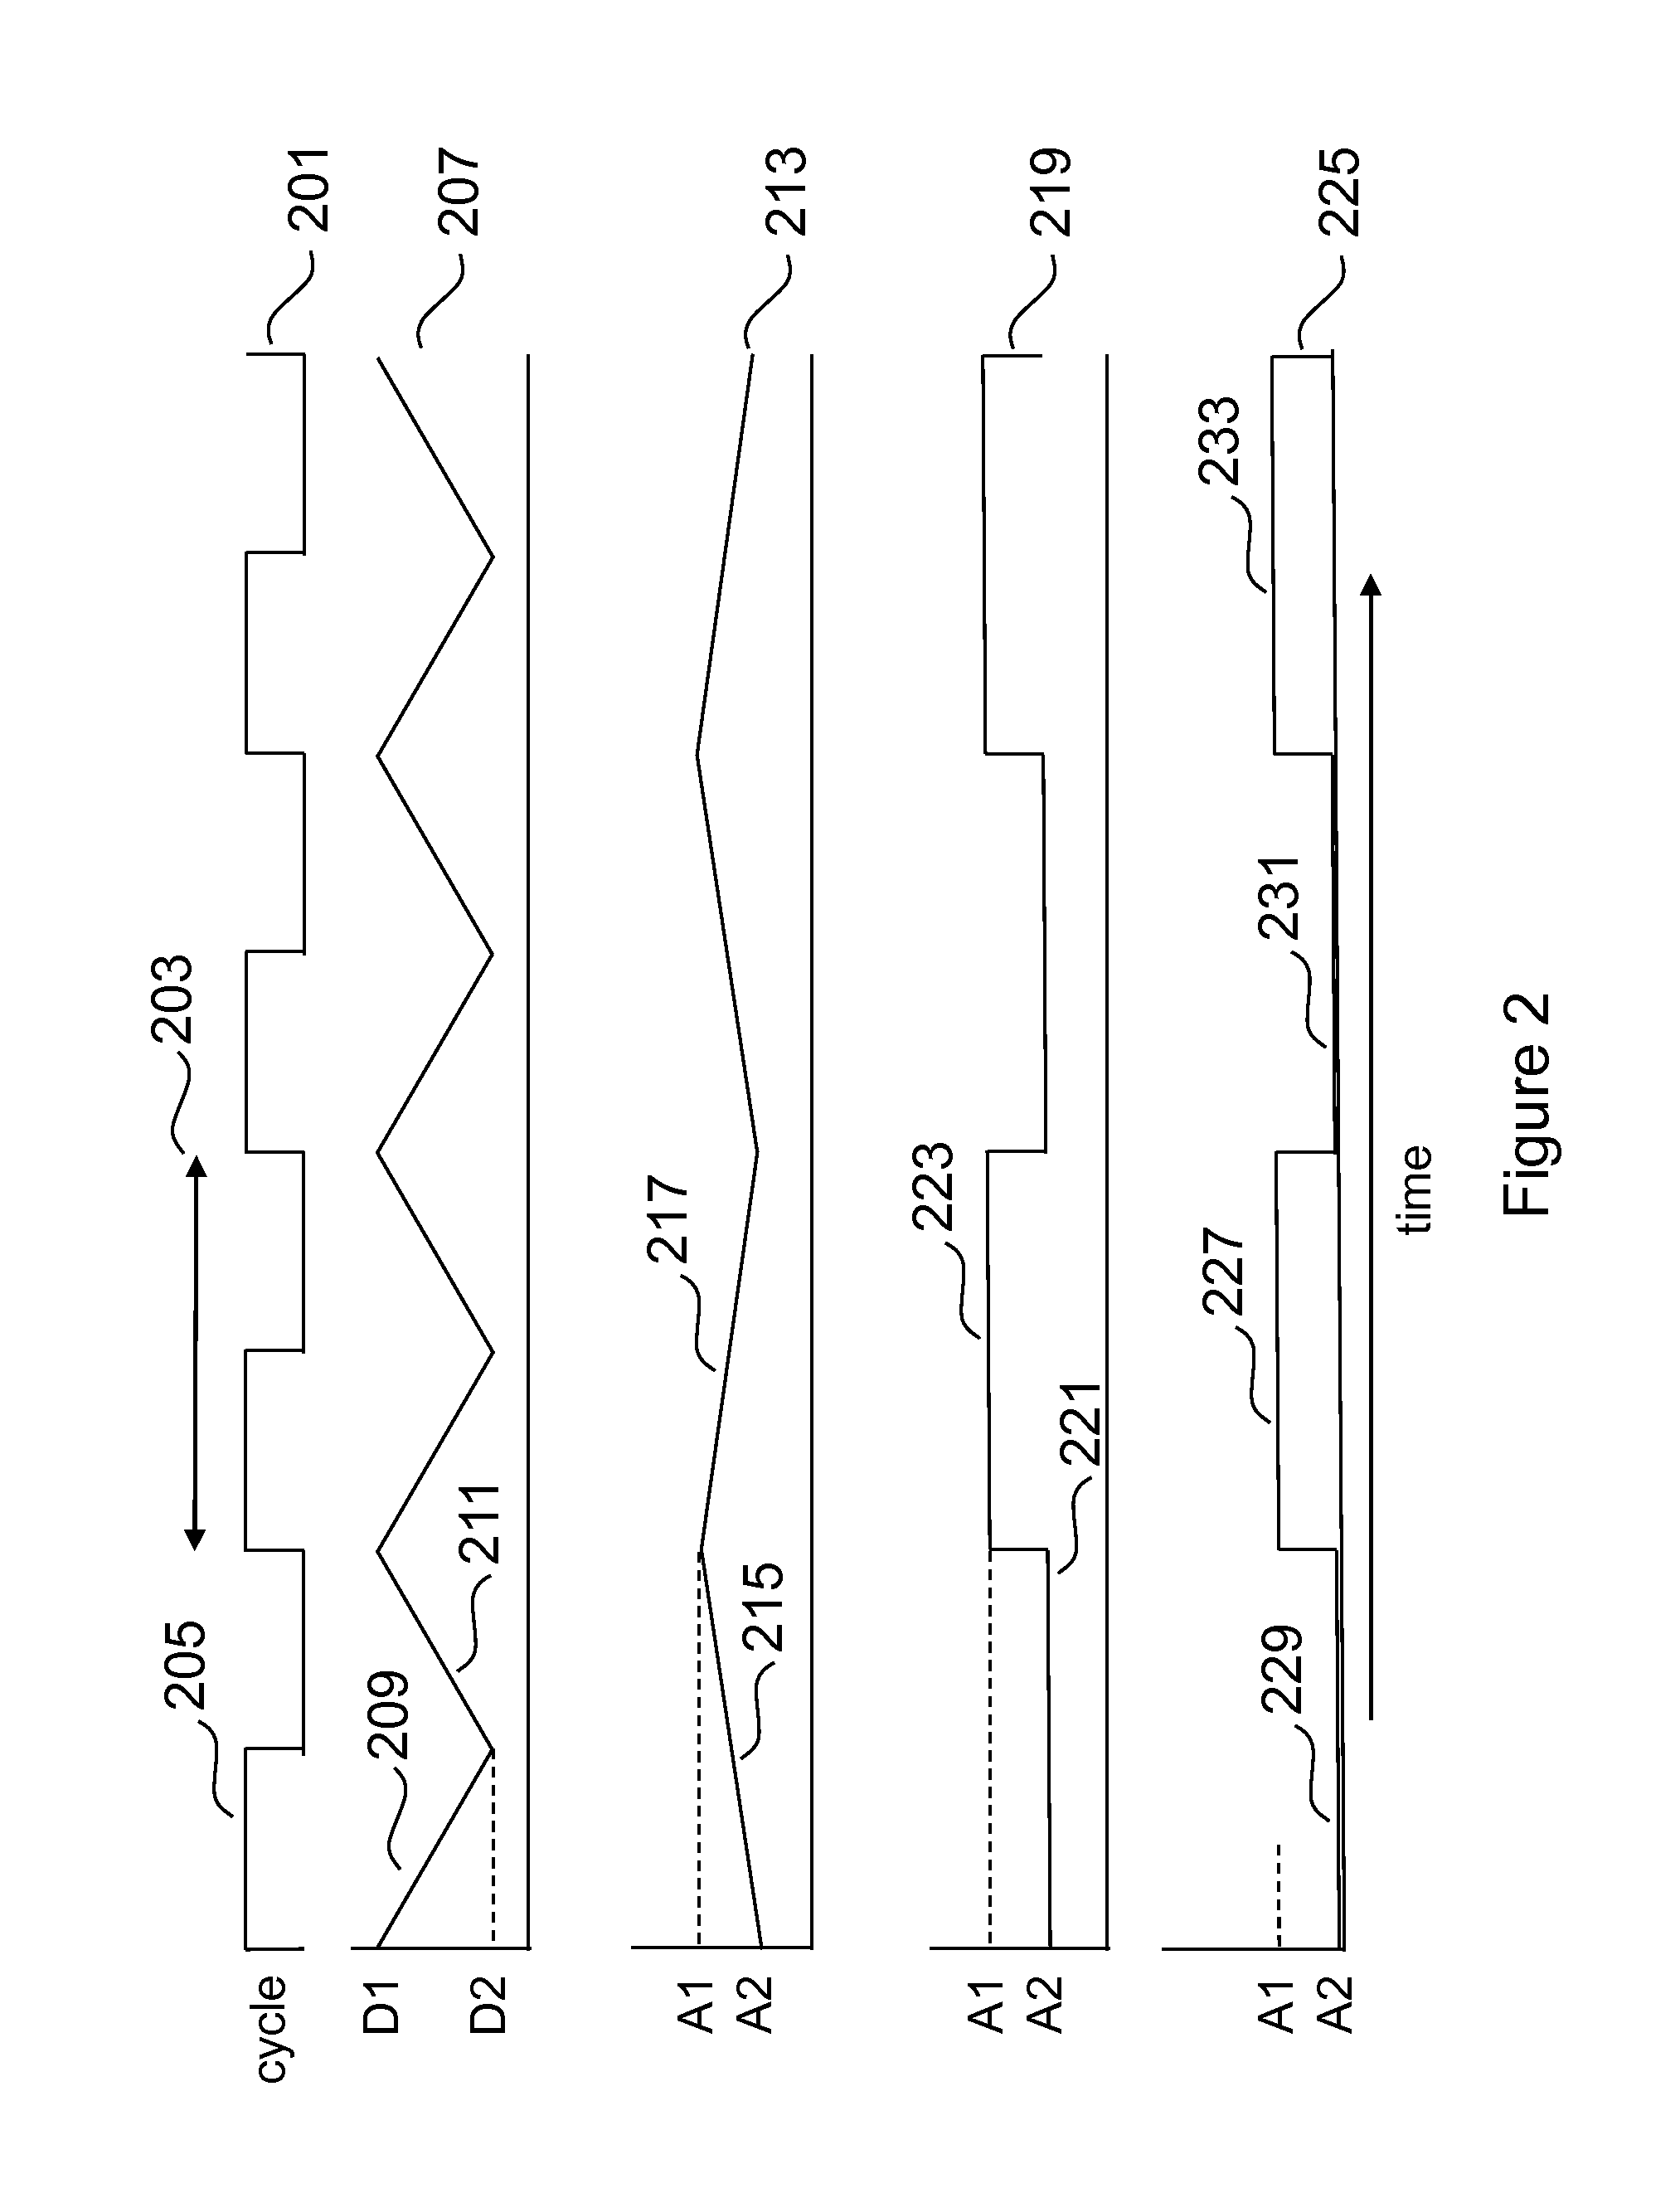 Enhanced OCT Measurement and Imaging Apparatus and Method